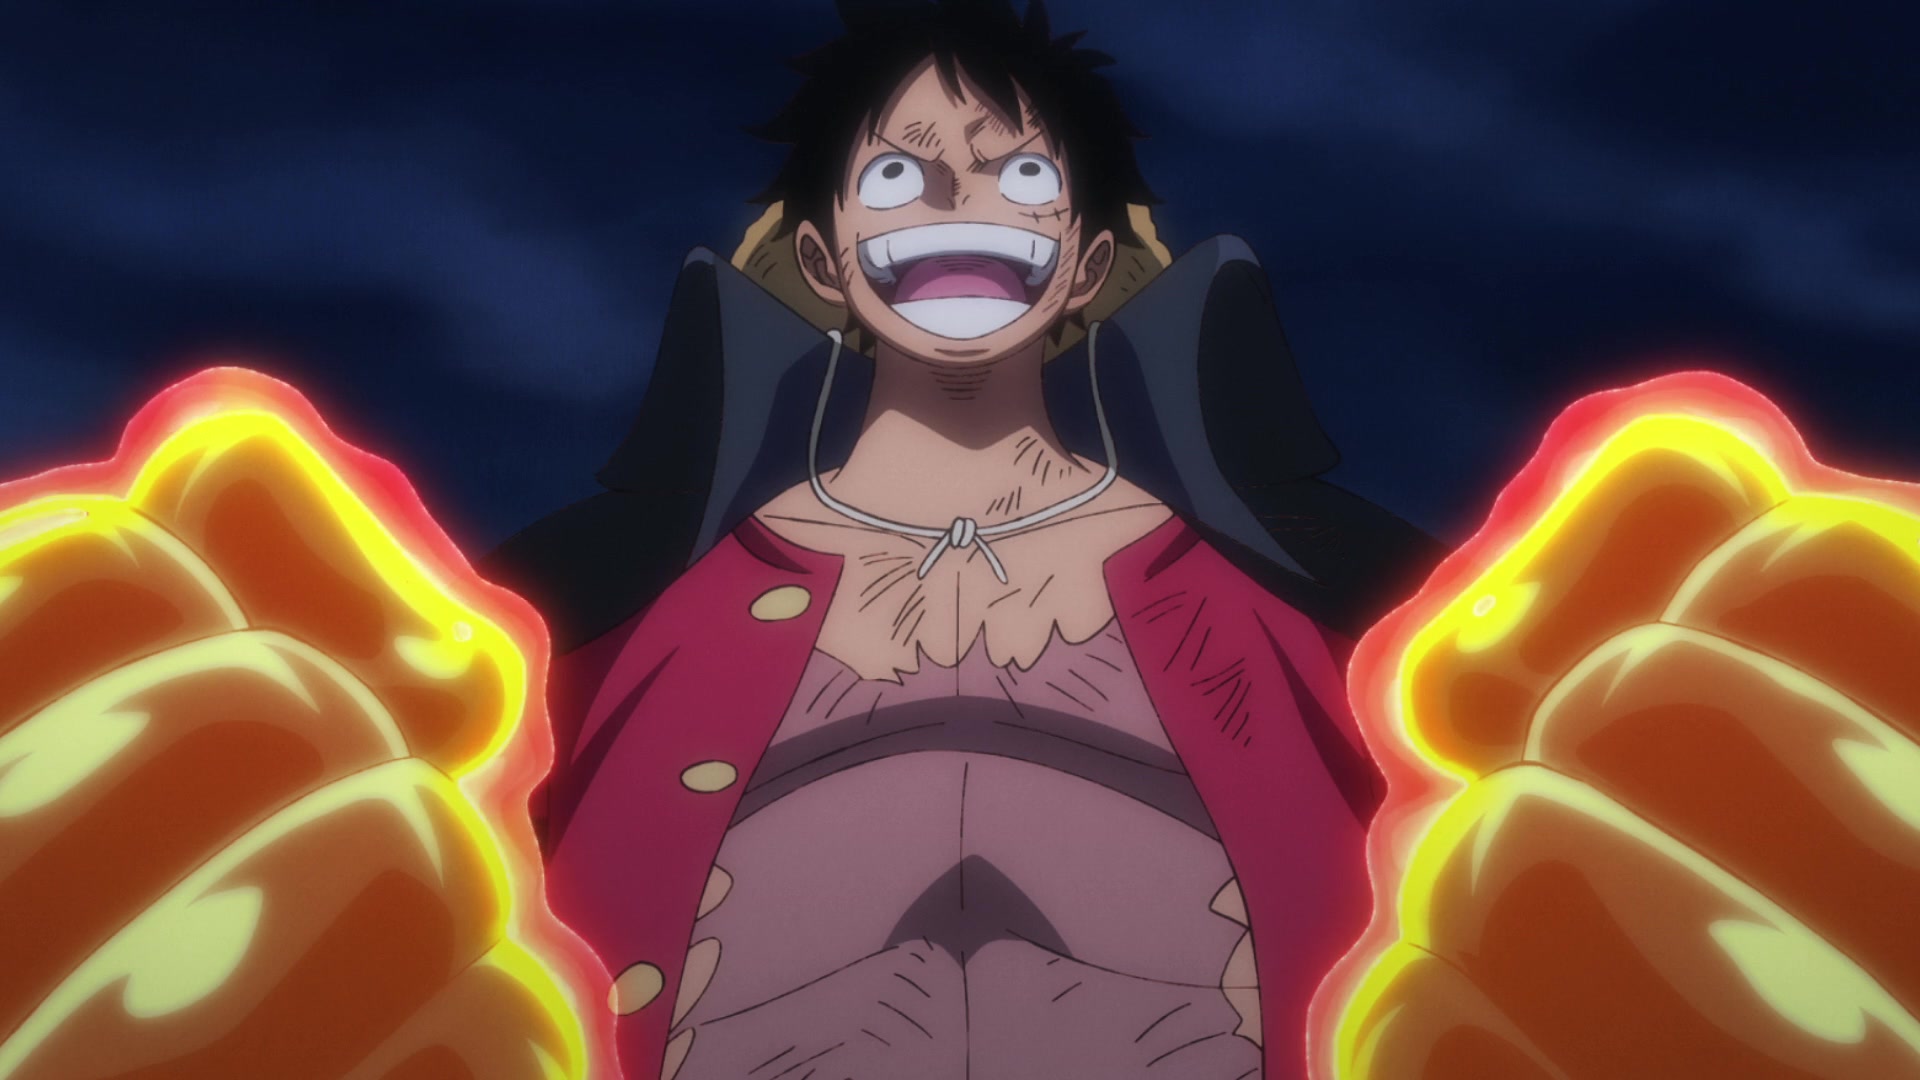 Heres Where To Watch One Piece Film Red Free Online Streaming At Home   Is It On Crunchyroll